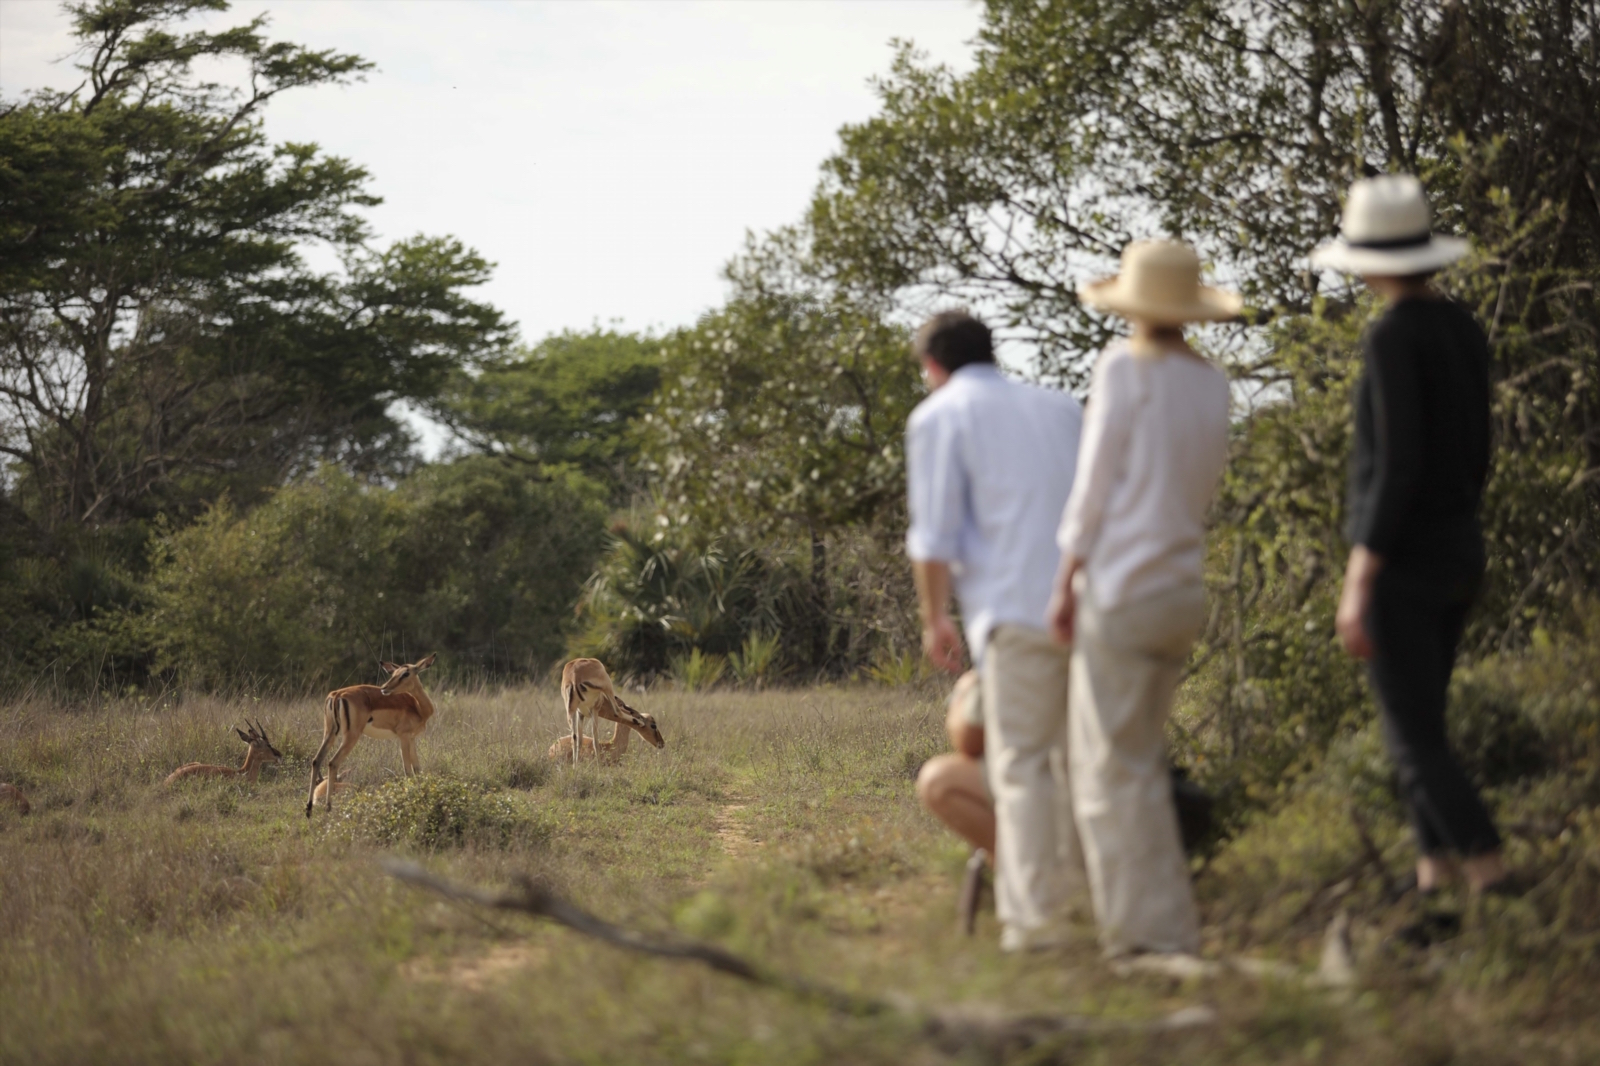 Game Walks (Bush walks) at Phinda Private Game Reserve, South Africa